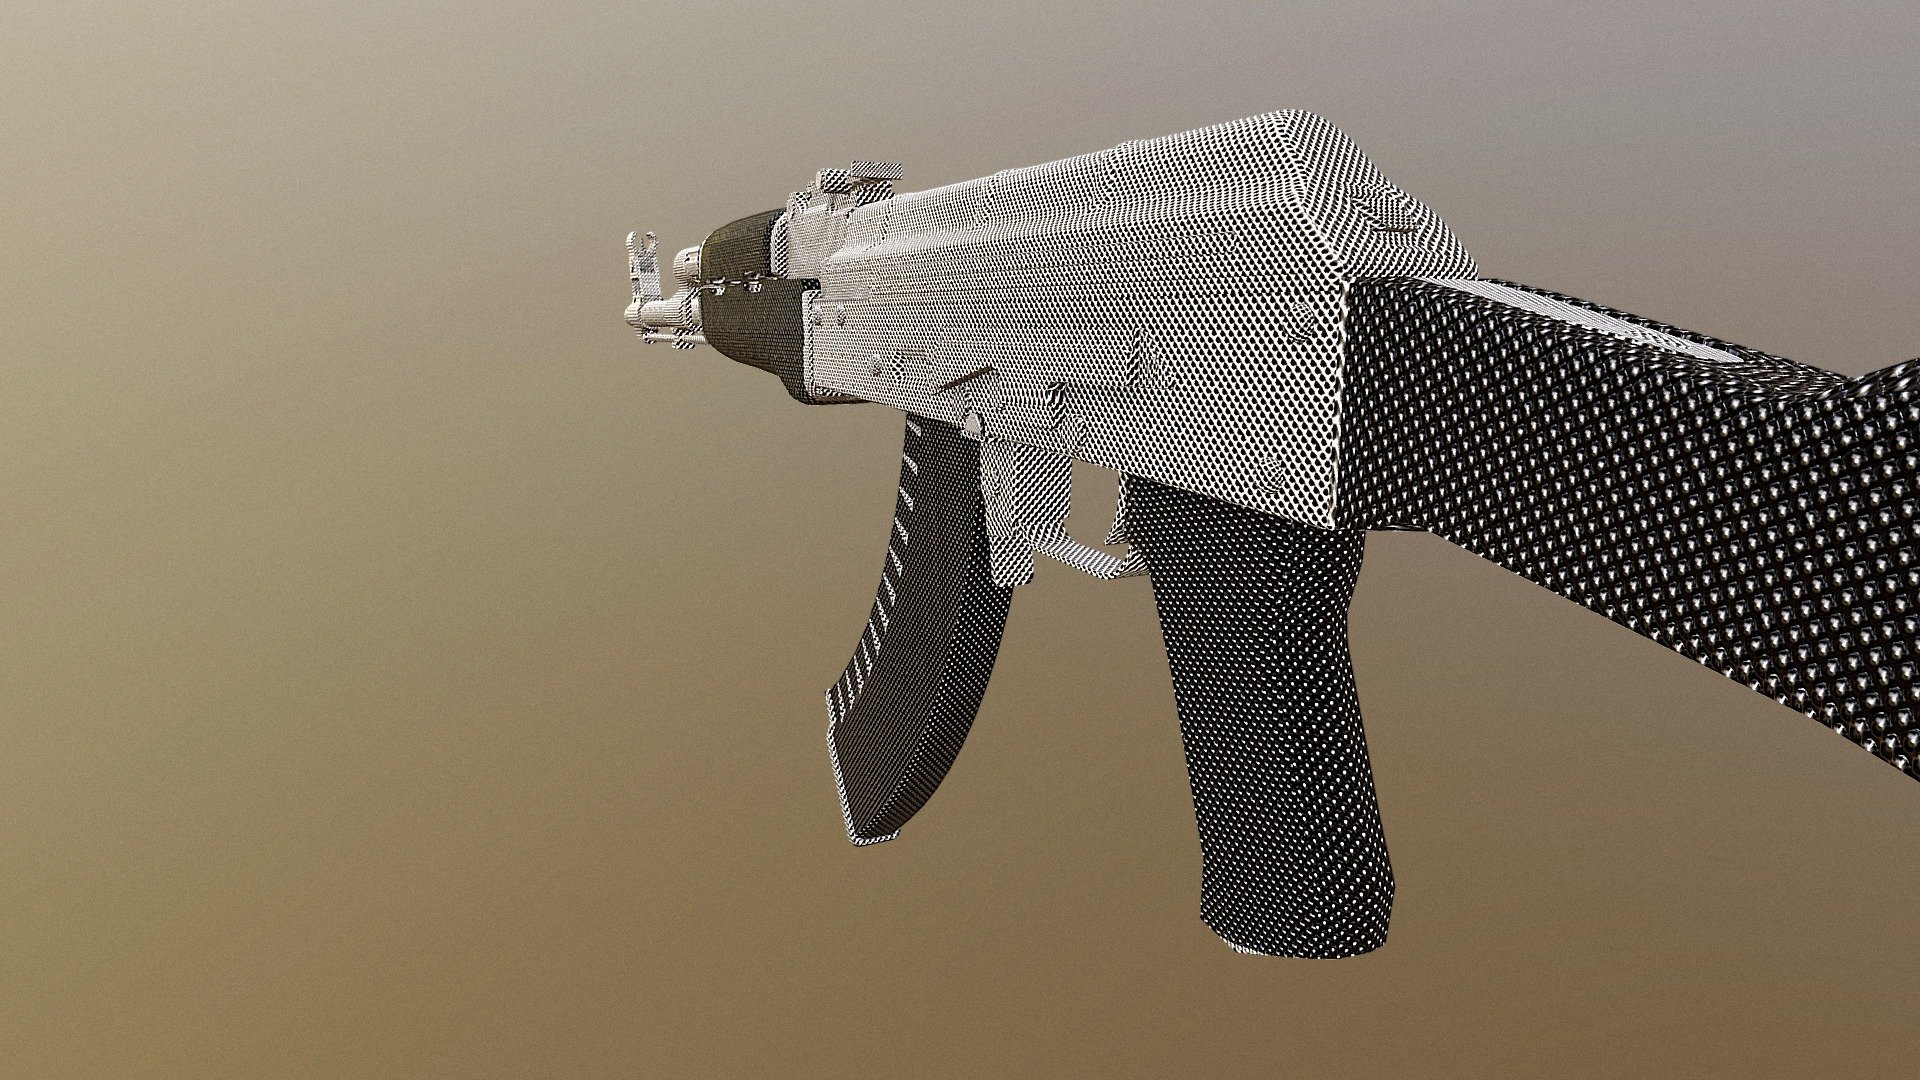 My lastest CSGO skin that I worked hard on. Link: http://steamcommunity.com/sharedfiles/filedetails/?id=1092099702 - Ak47 | Contrast - 3D model by CXyber 3d model